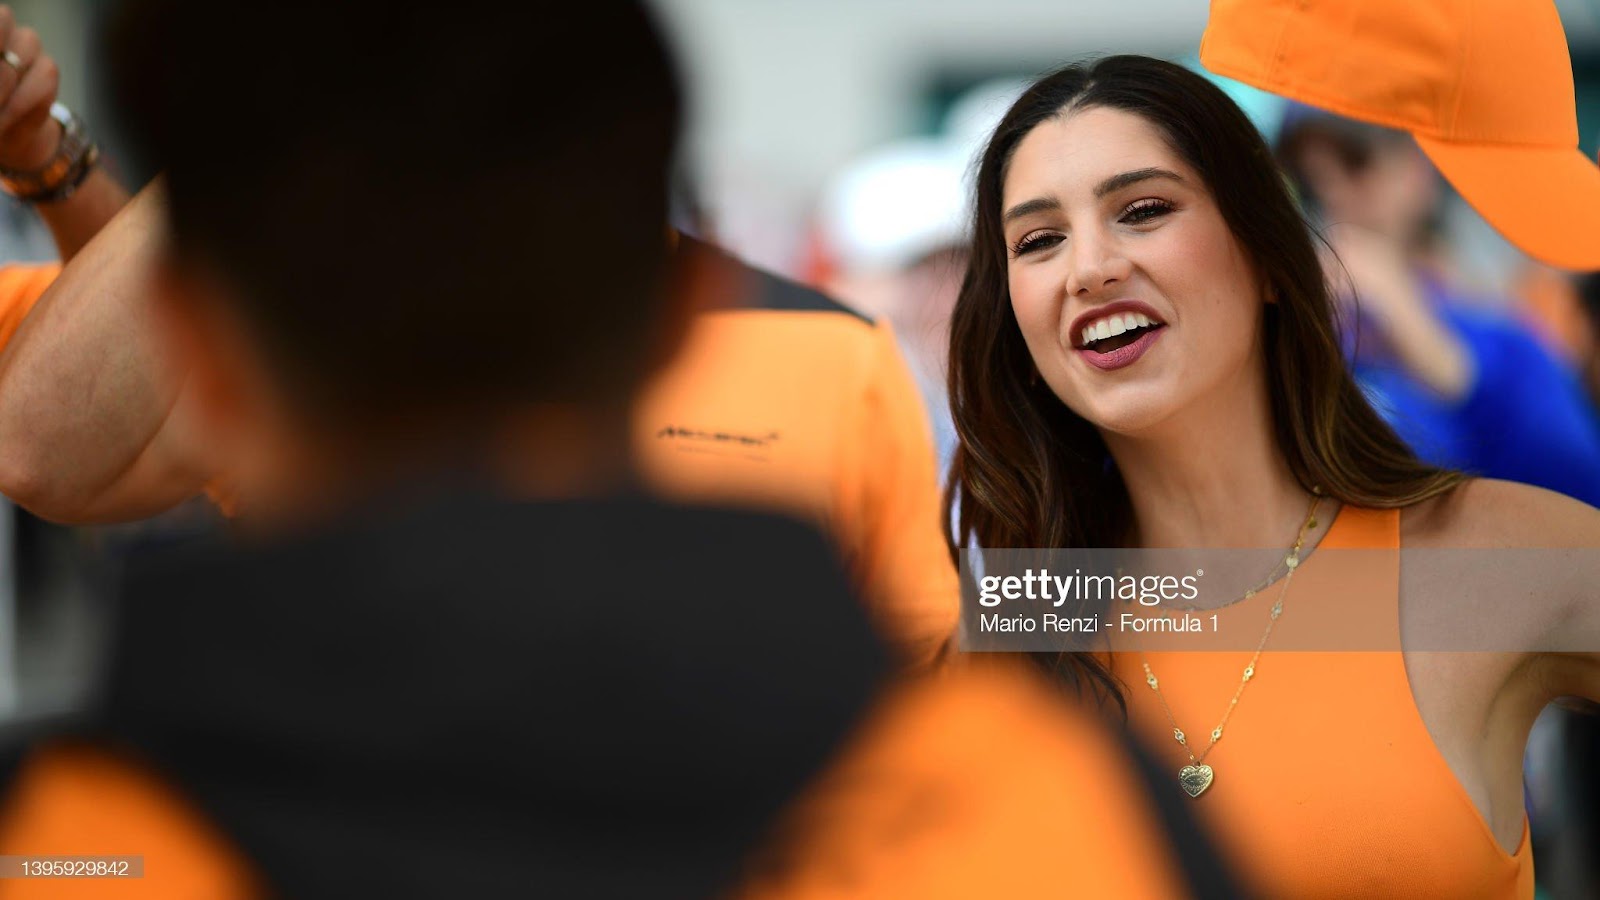 D:\Documenti\posts\posts\Miami\New folder\donne\lando-norris-of-great-britain-and-mclaren-greets-fans-prior-to-final-picture-id1395929842.jpg